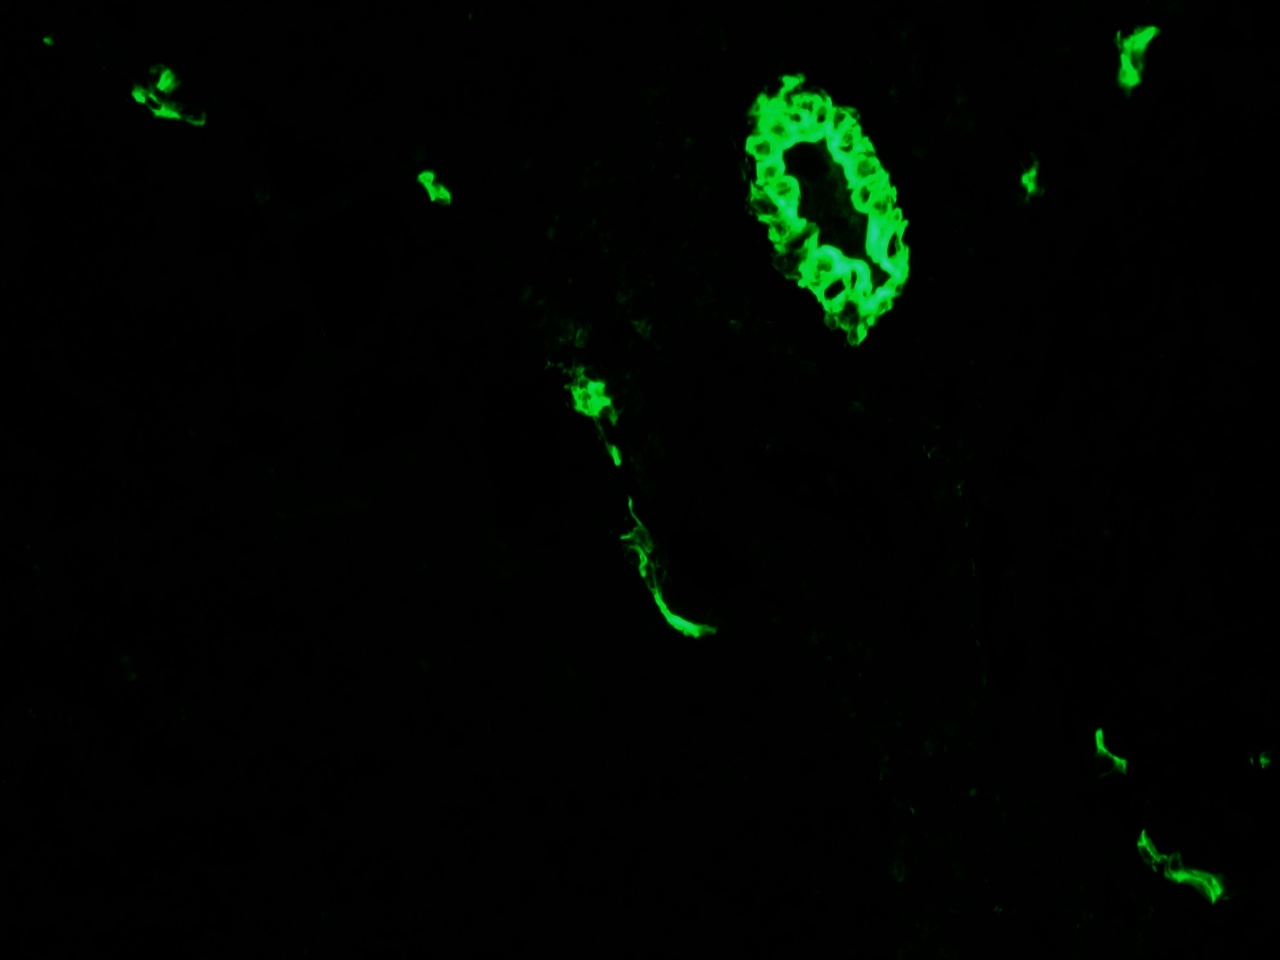 Figure 1 - Immunohistochemistry of MUB0315P (RCK105) on frozen sections of swine liver showing positive staining in the epithelial cells lining the bile ducts and no reactivity in hepatocytes or connective tissue. Dilution 1:500